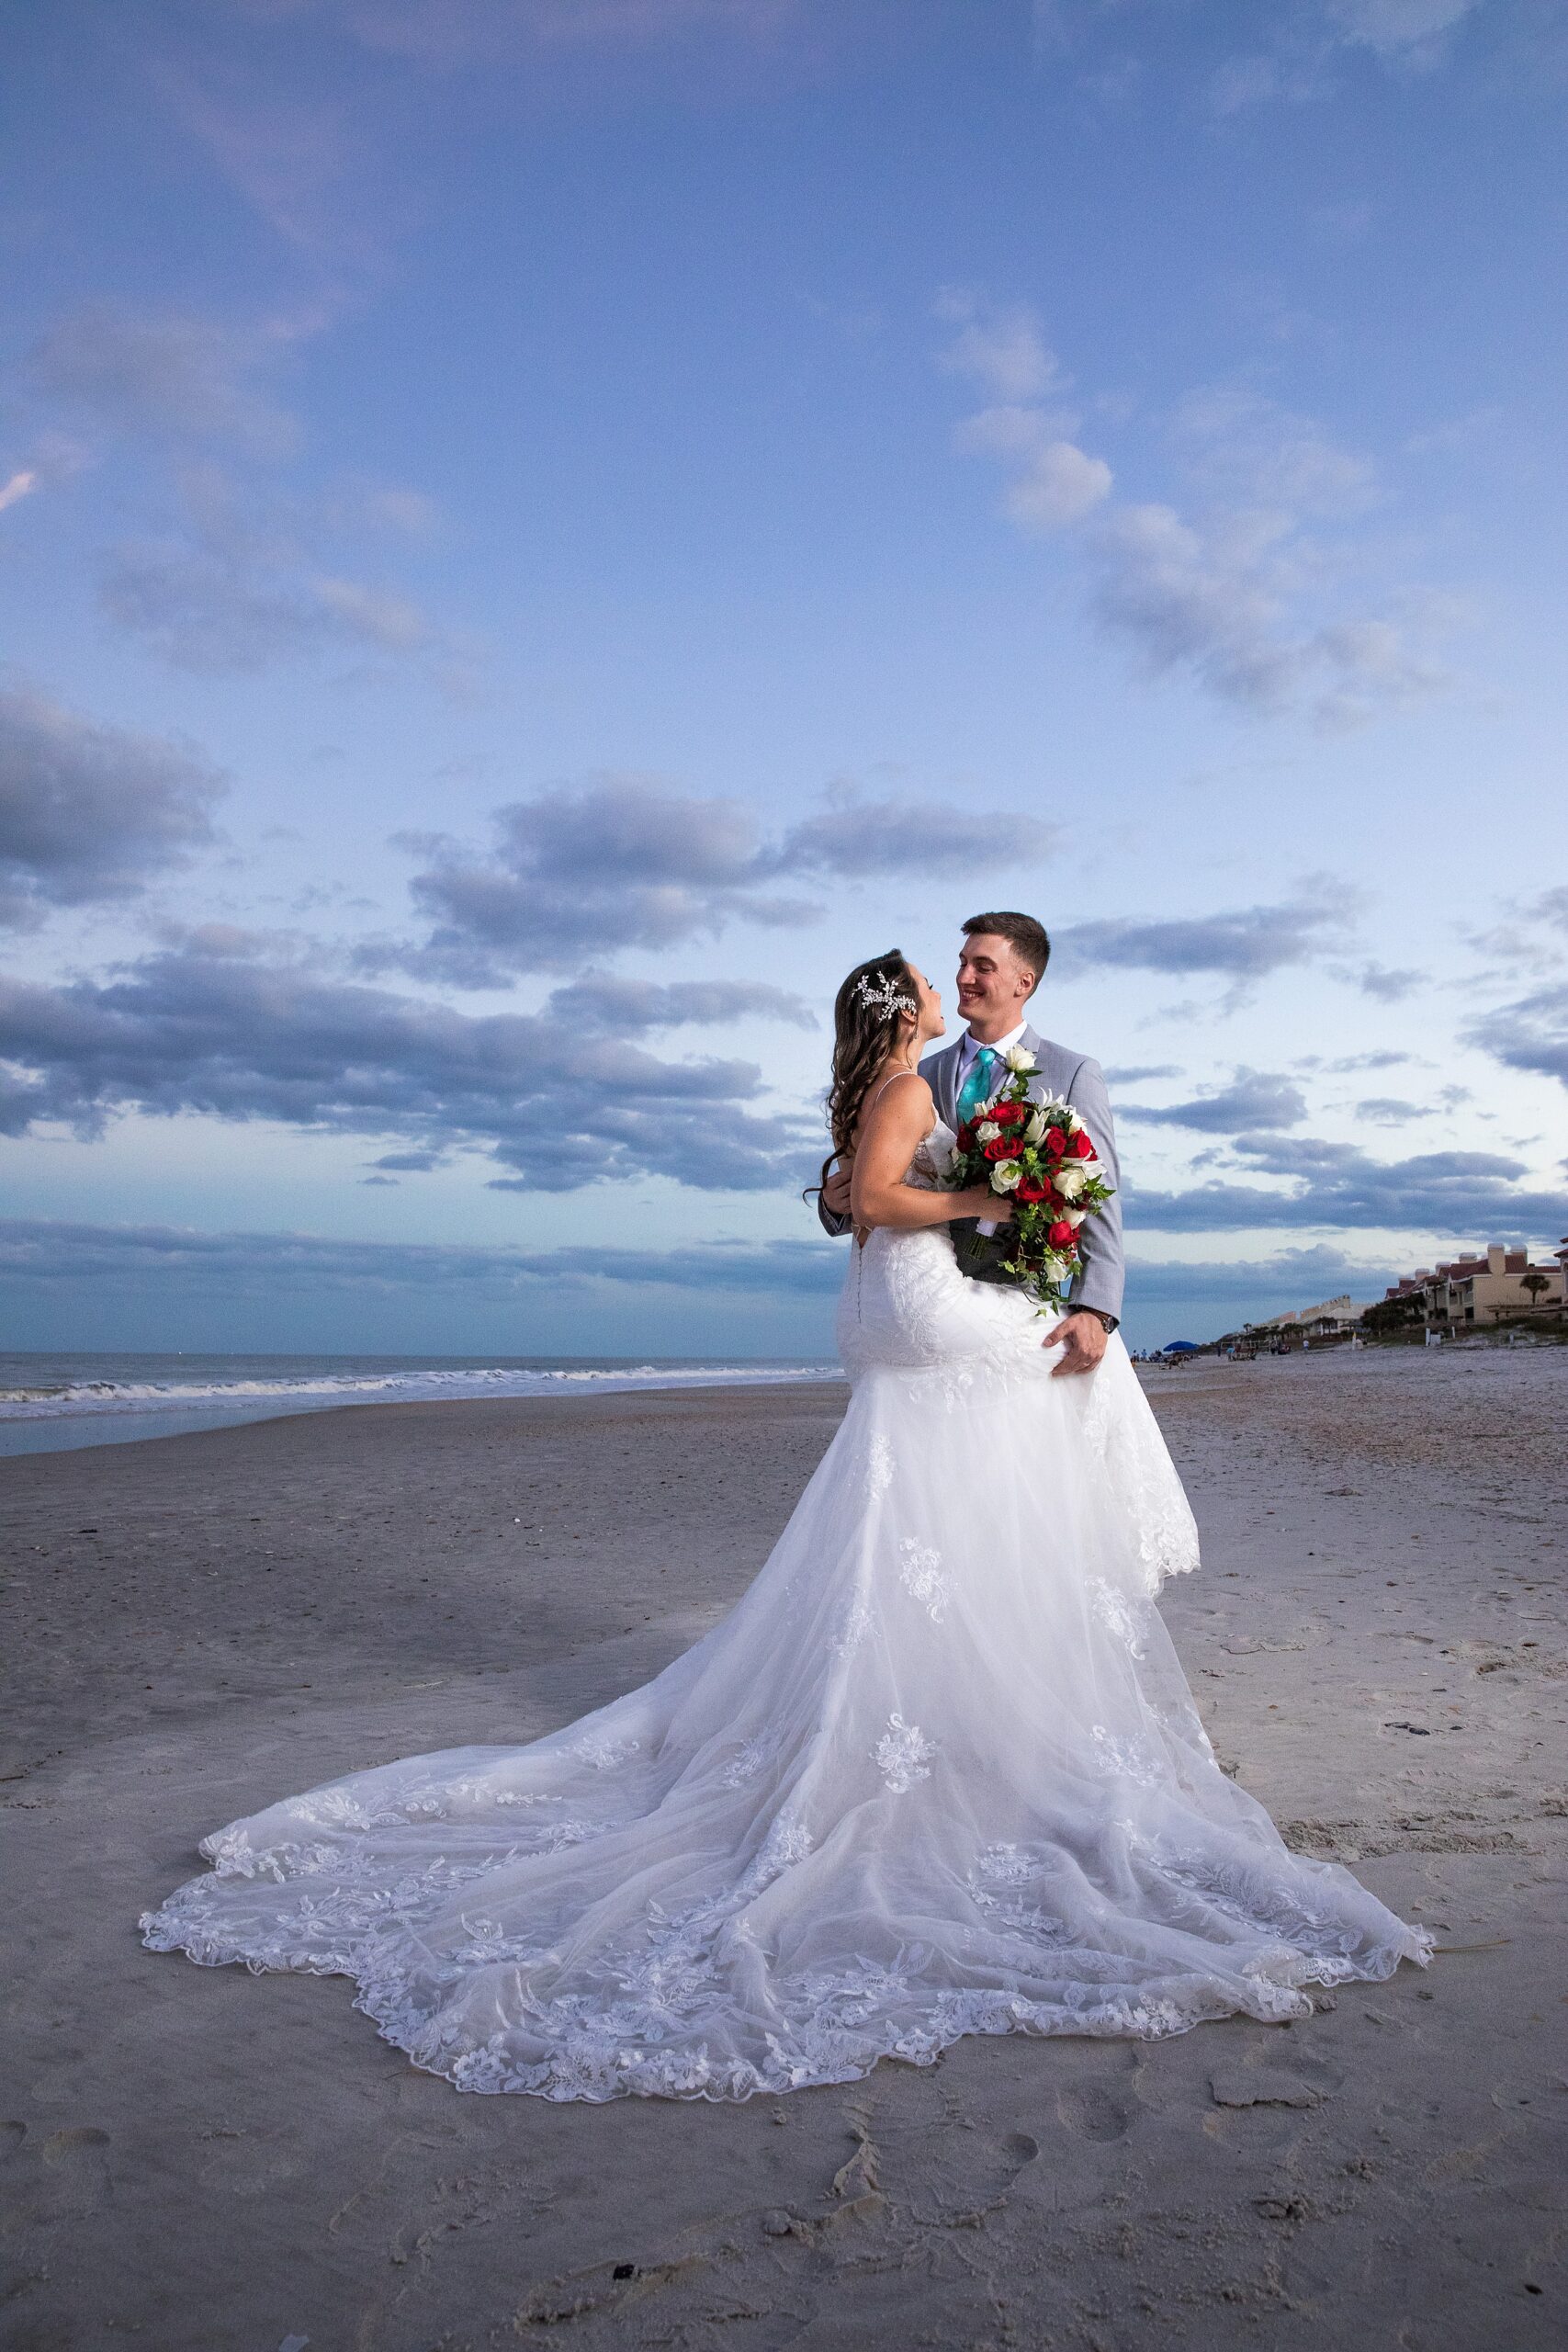 A bride and groom embrace while standing on the beach at sunset